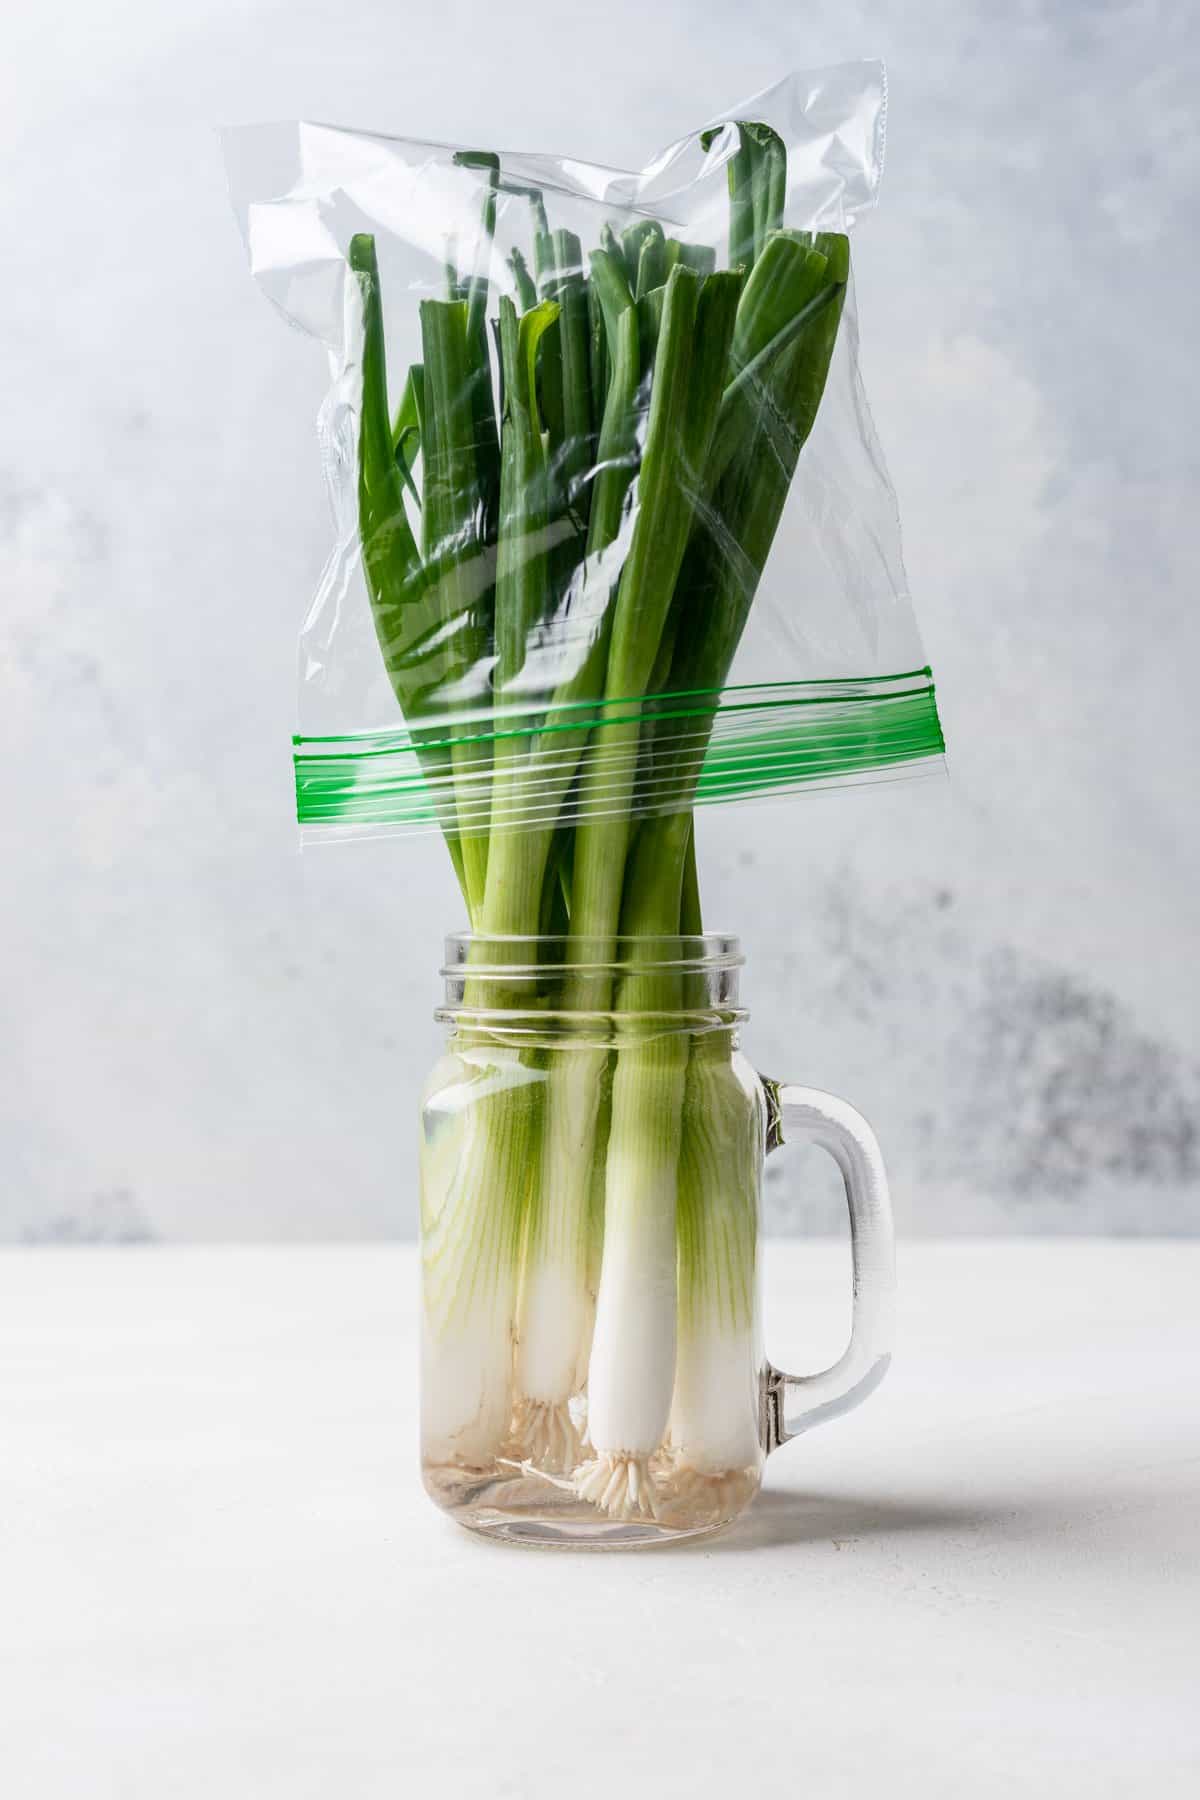 Green onions in a jar of water with a plastic bag over top.